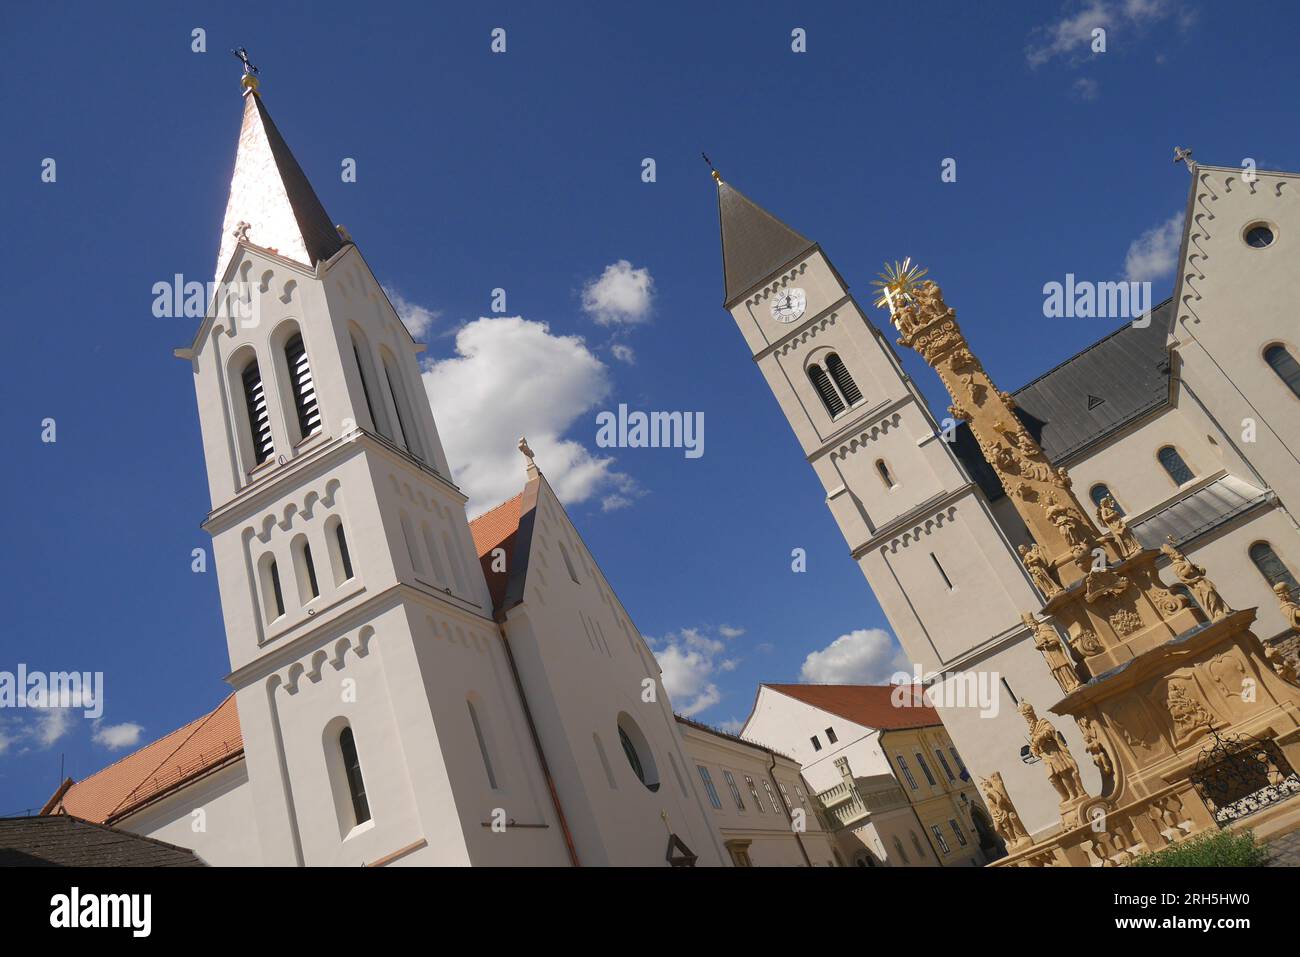 The Hungarian baroque Holy Trinity Column, the Franciscan Church, and the Catholic St Michael’s Church, Holy Trinity Square, Veszprem, Hungary Stock Photo